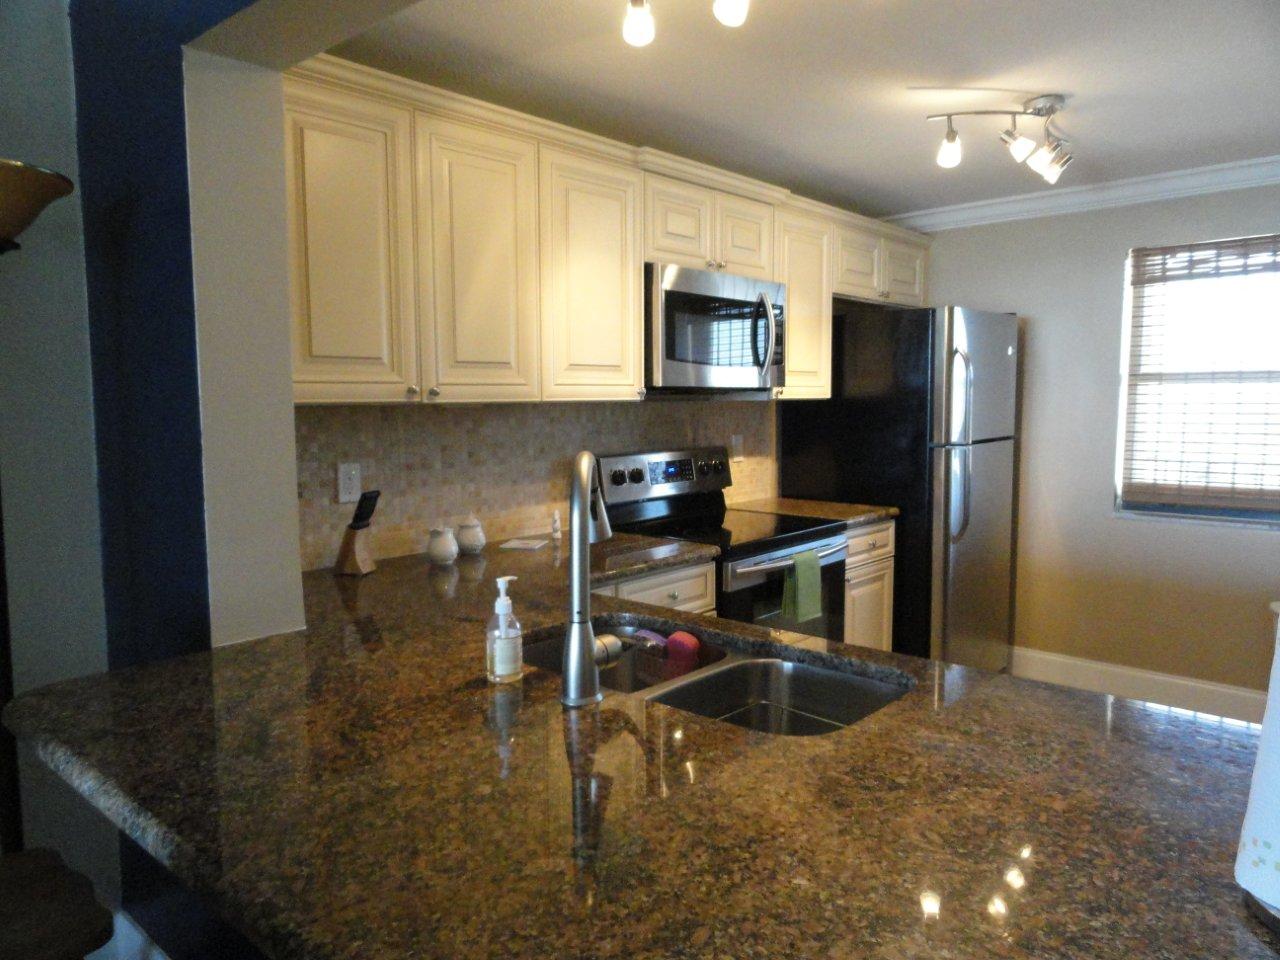 Newly renovated kitchen, all stainless steel appliances, and granite countertops